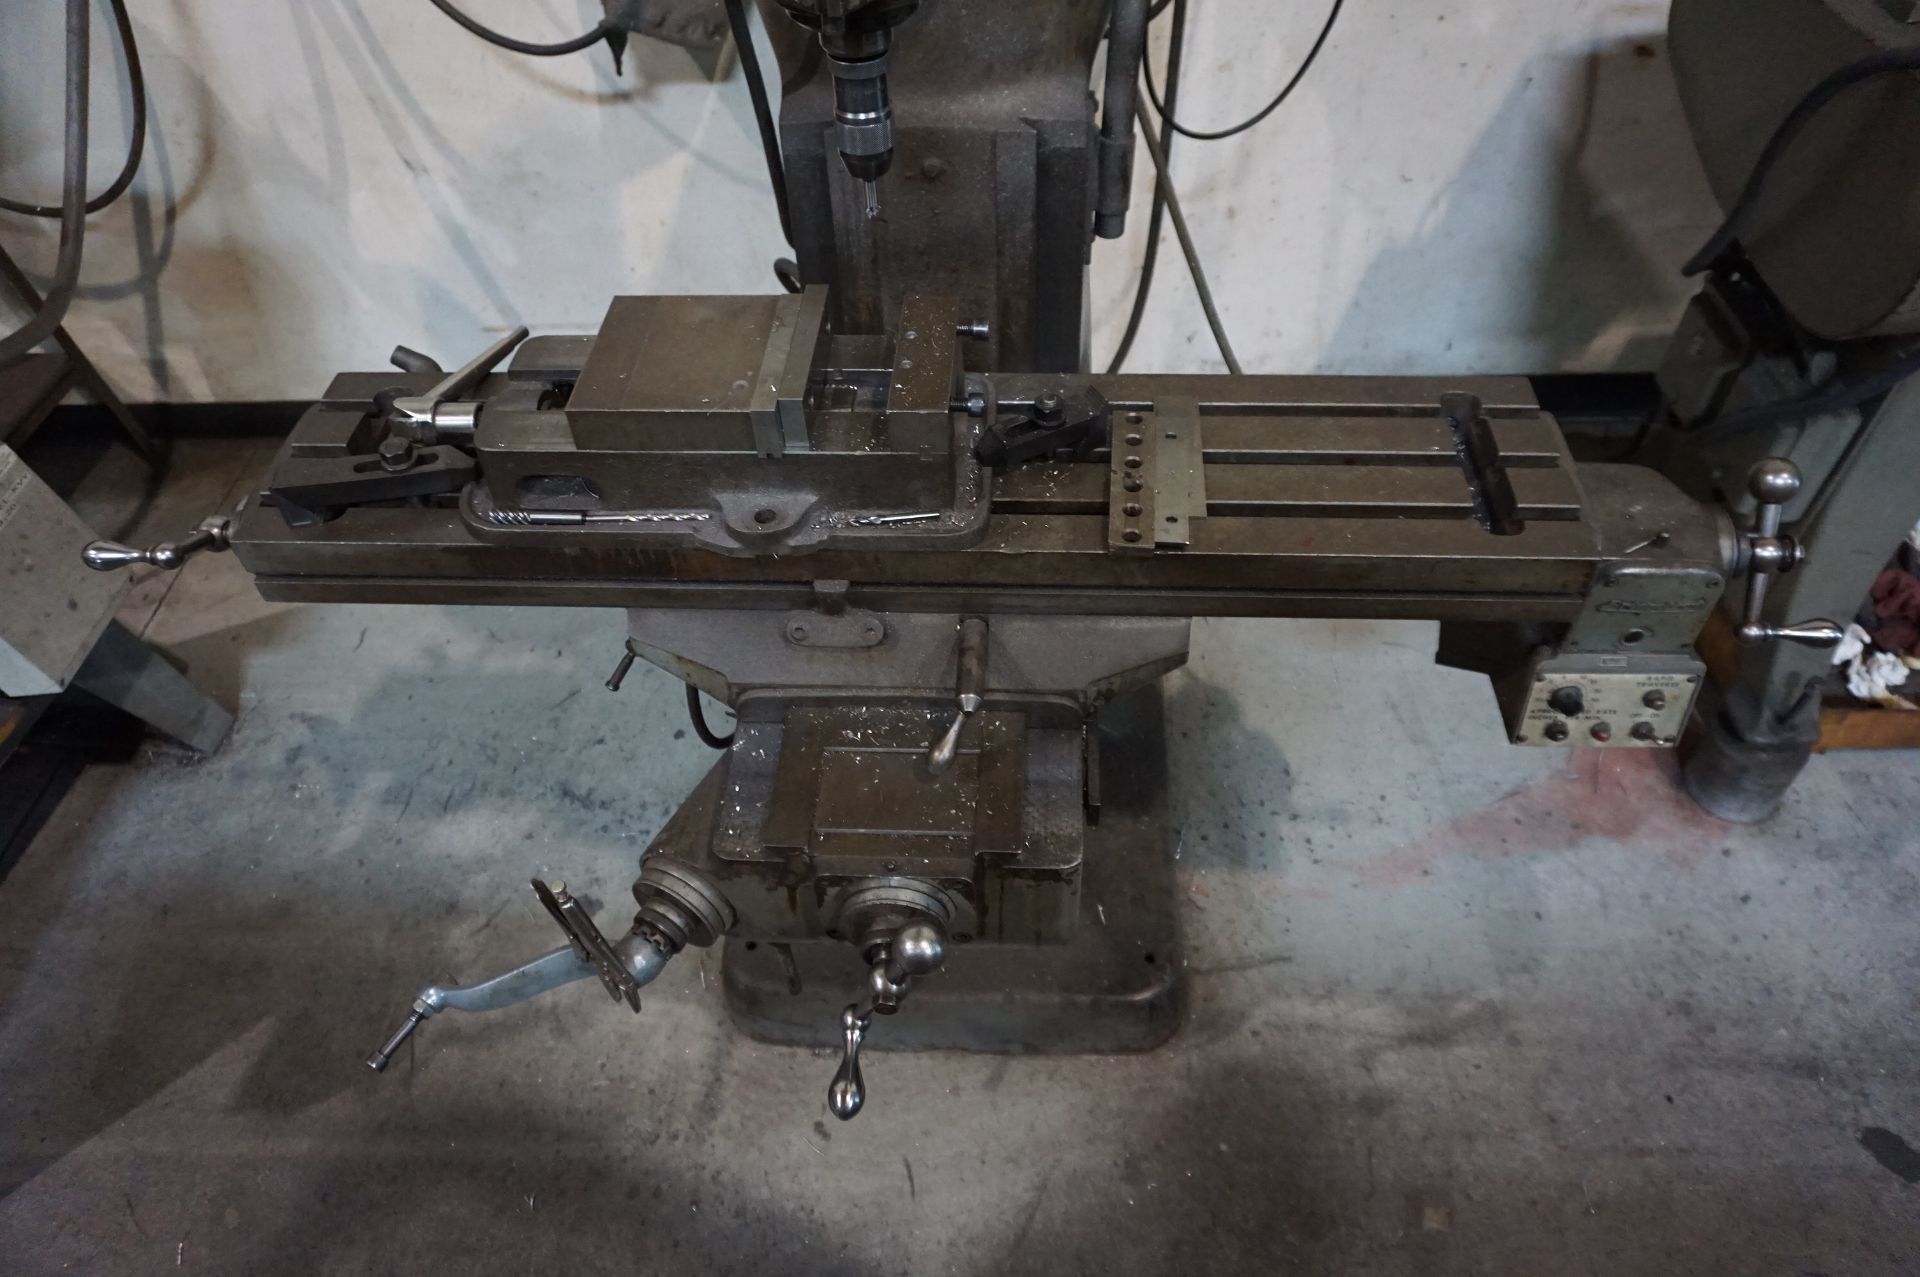 RIDGEPORT SERIES 1 2 HP KNEE MILL S/N J235490 WITH BRIDGEPORT 2 AXIS DIGITAL READ OUT AND 6" MACHINE - Image 2 of 5